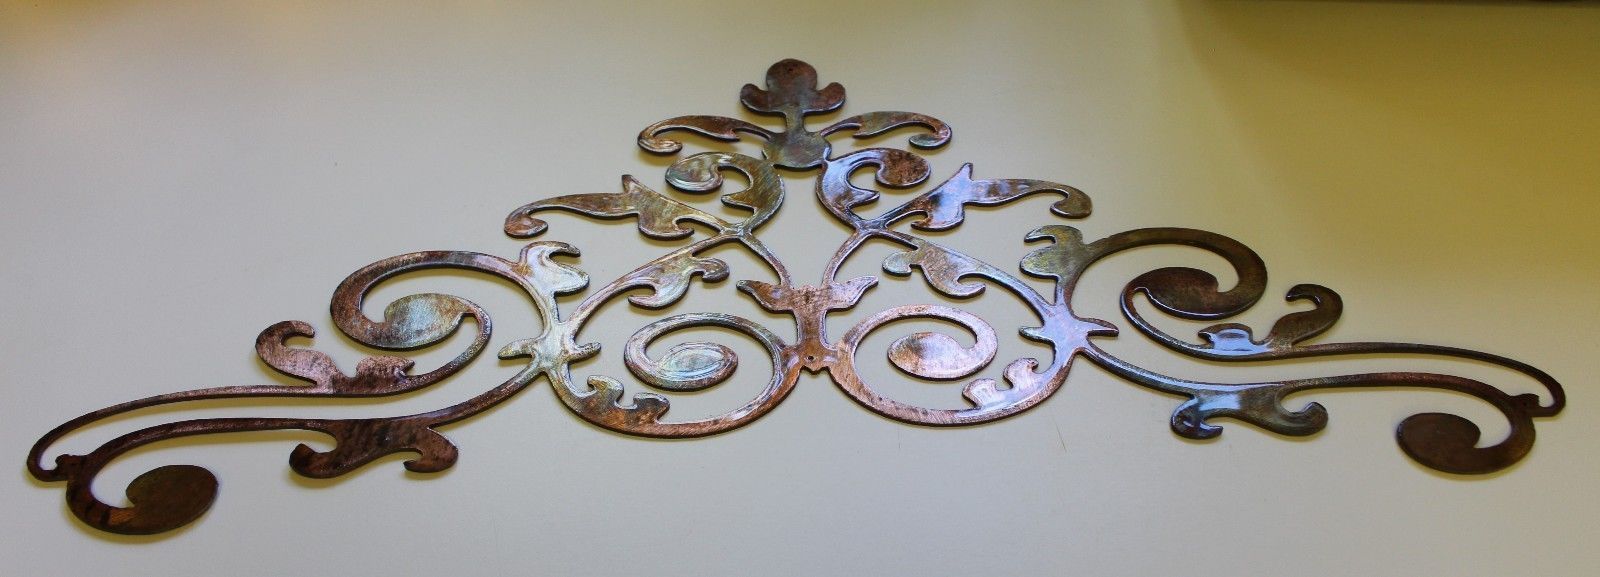 Ornamental Scroll Copper/bronze Plated Metal Wall Decor 24 X 9 3/4 With Regard To Recent Square Bronze Metal Wall Art (View 12 of 20)